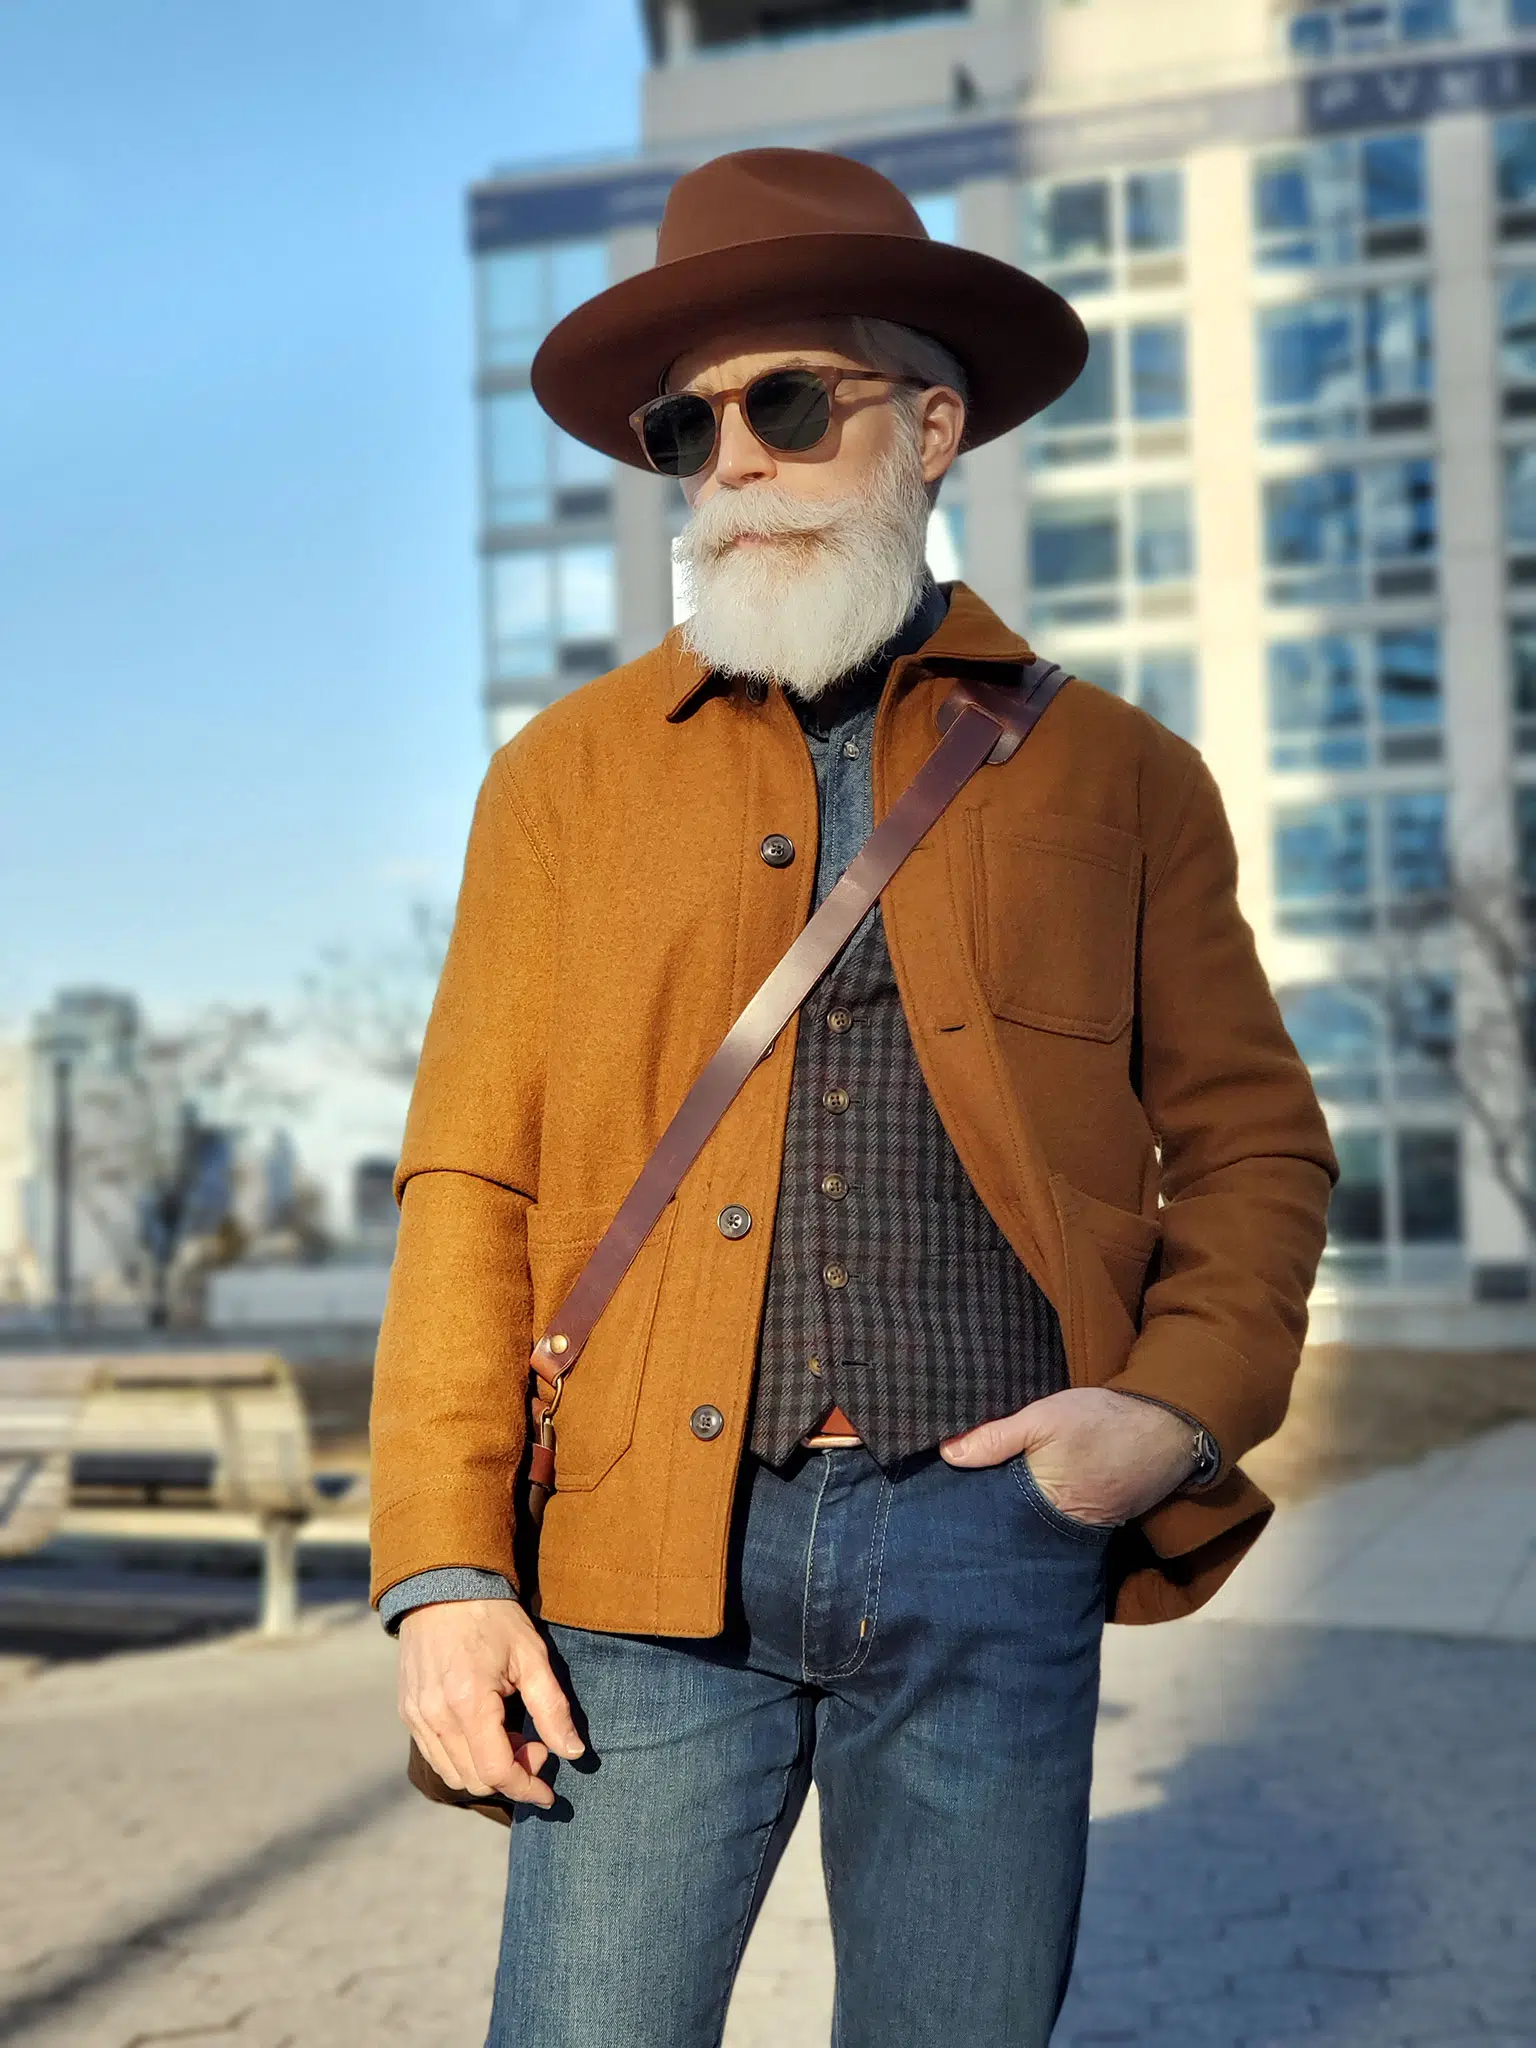 Chore Jacket with Satchel Bag and Fedora - The Modest Man